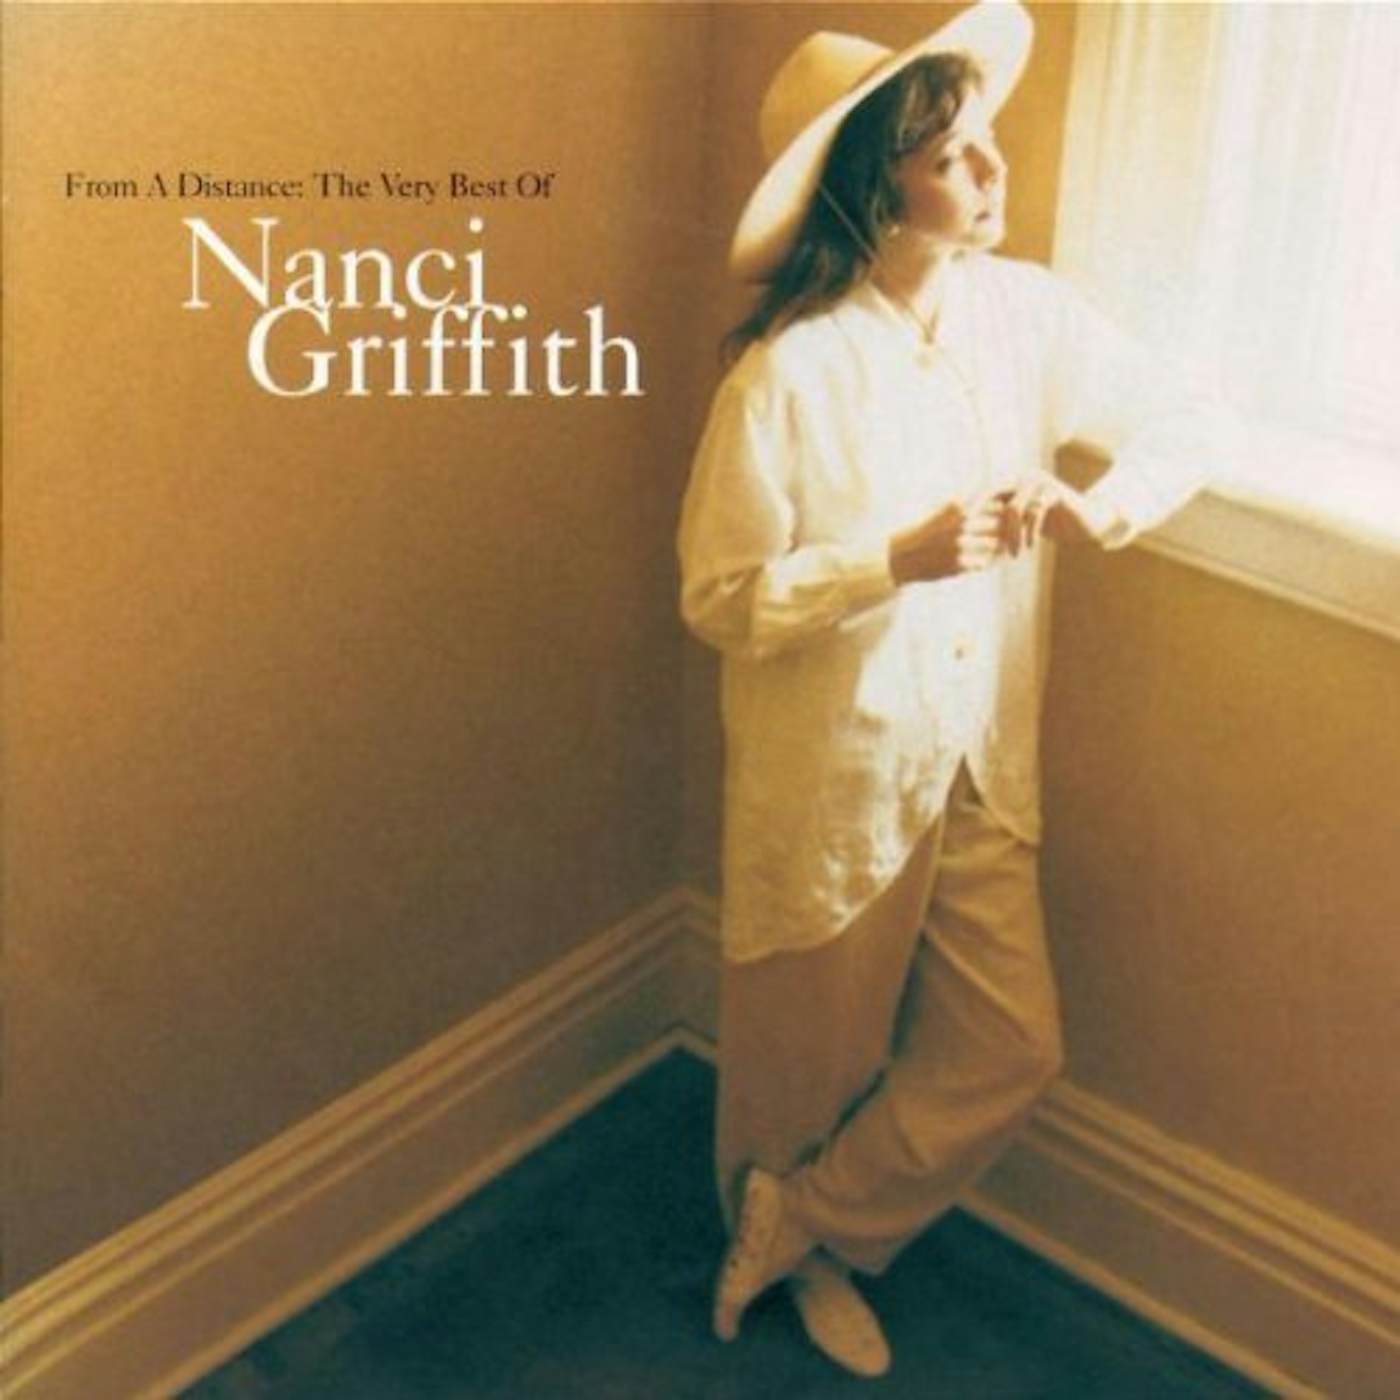 Nanci Griffith FROM A DISTANCE: THE VERY BEST OF CD